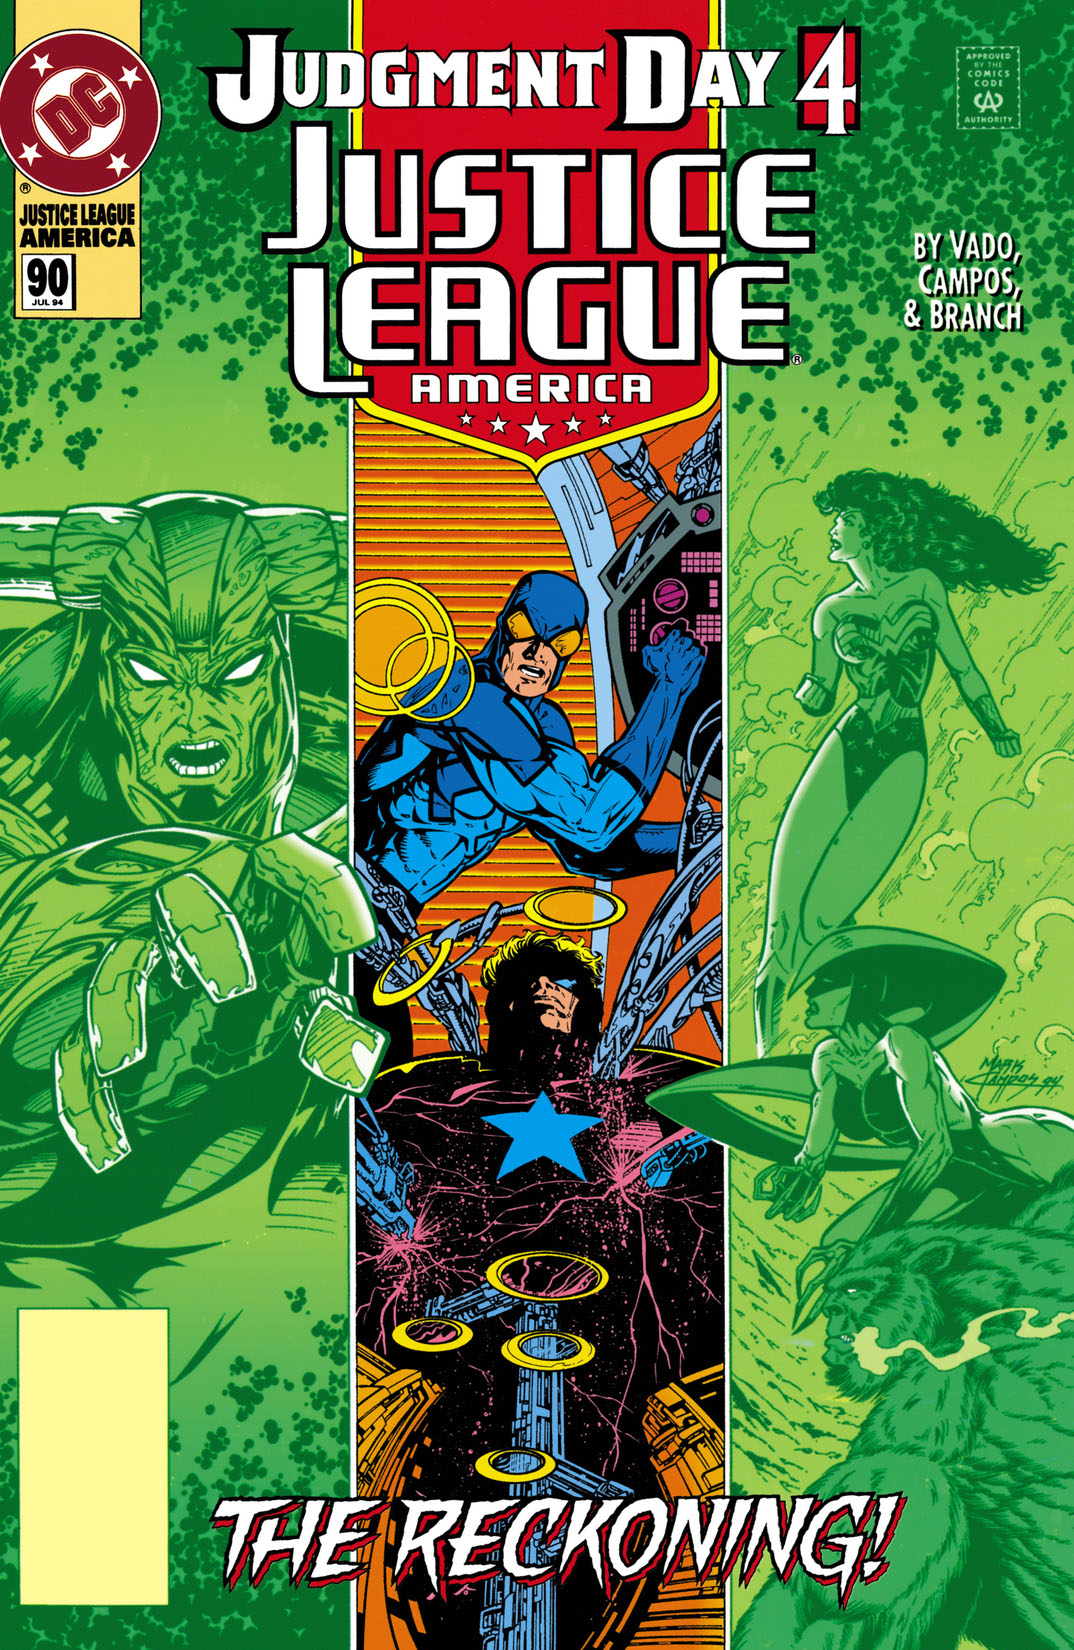 Justice League America (1987-) #90 preview images